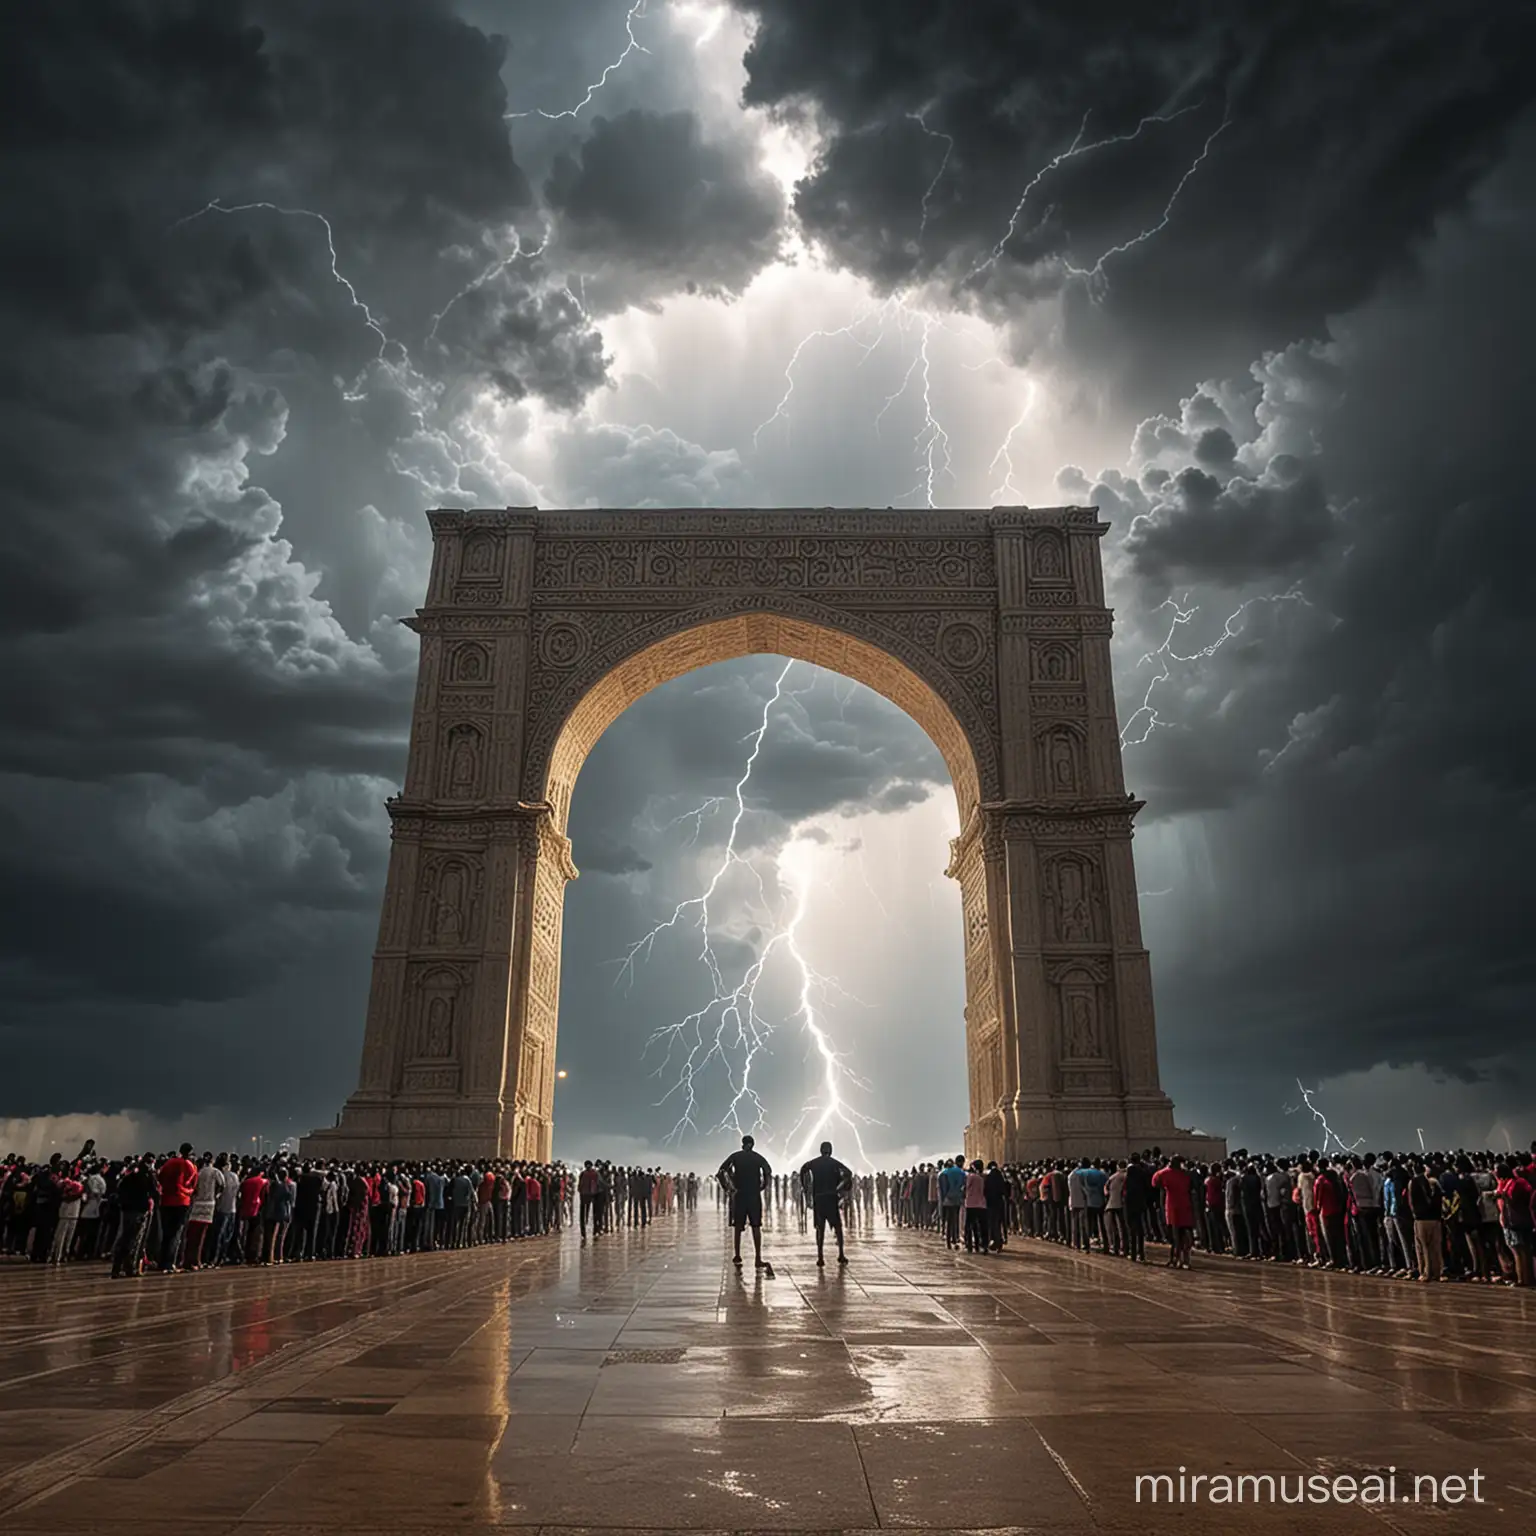 Heavenly Arch Door Amidst Thunder and Light with a Million Men Entering